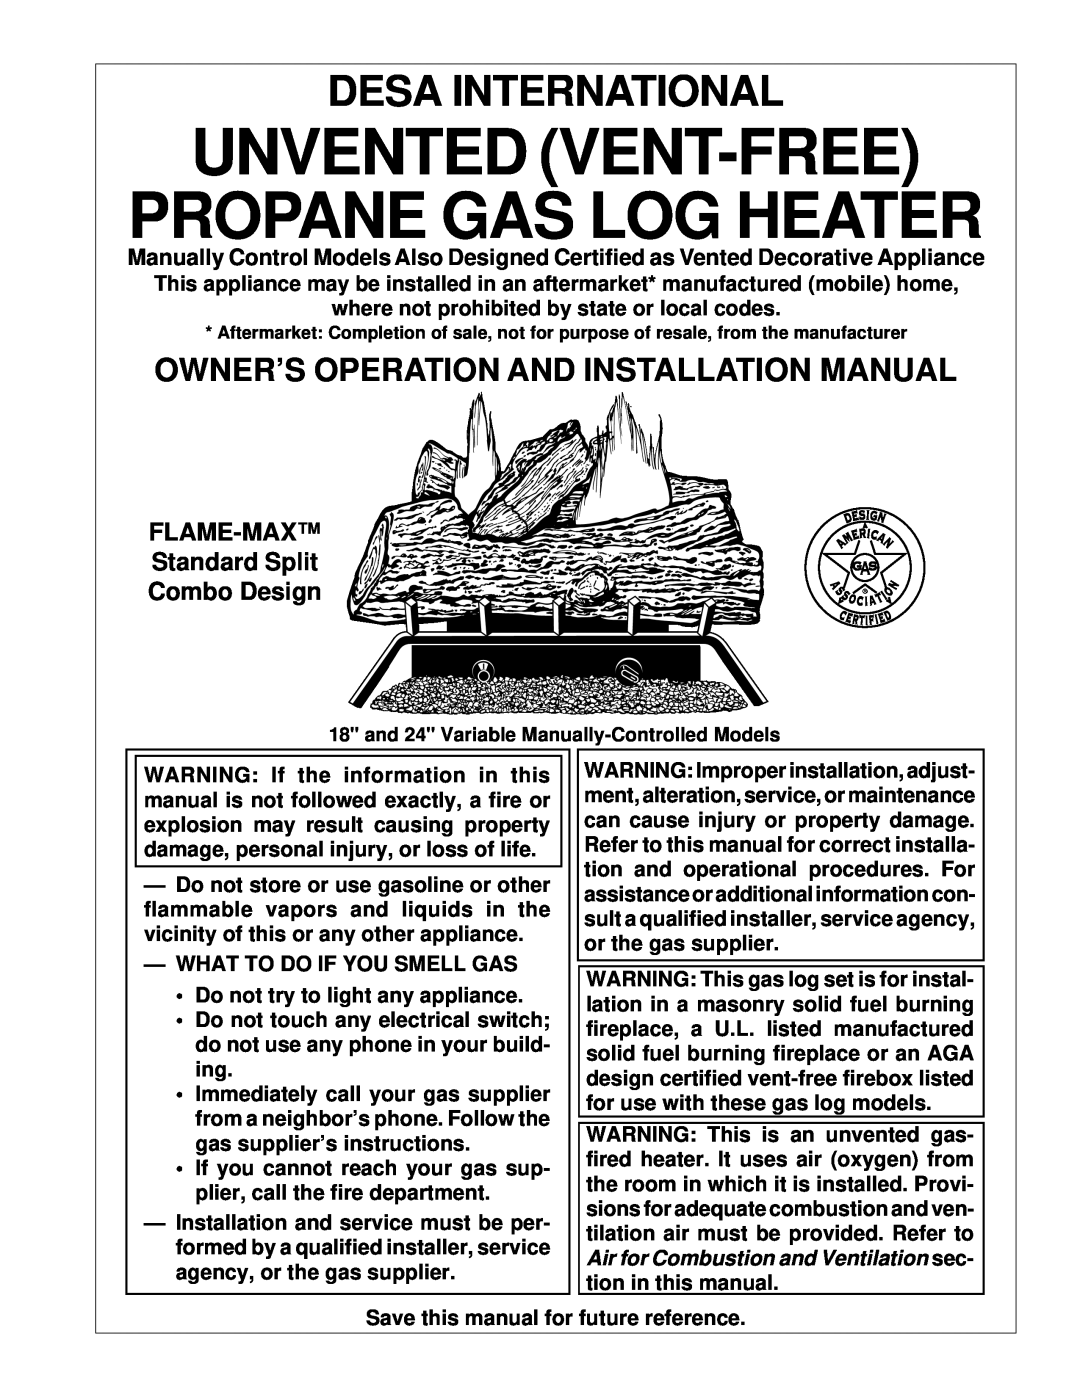 Desa 102783-01B installation manual Owner’S Operation And Installation Manual, Flame-Max, Standard Split, Combo Design 